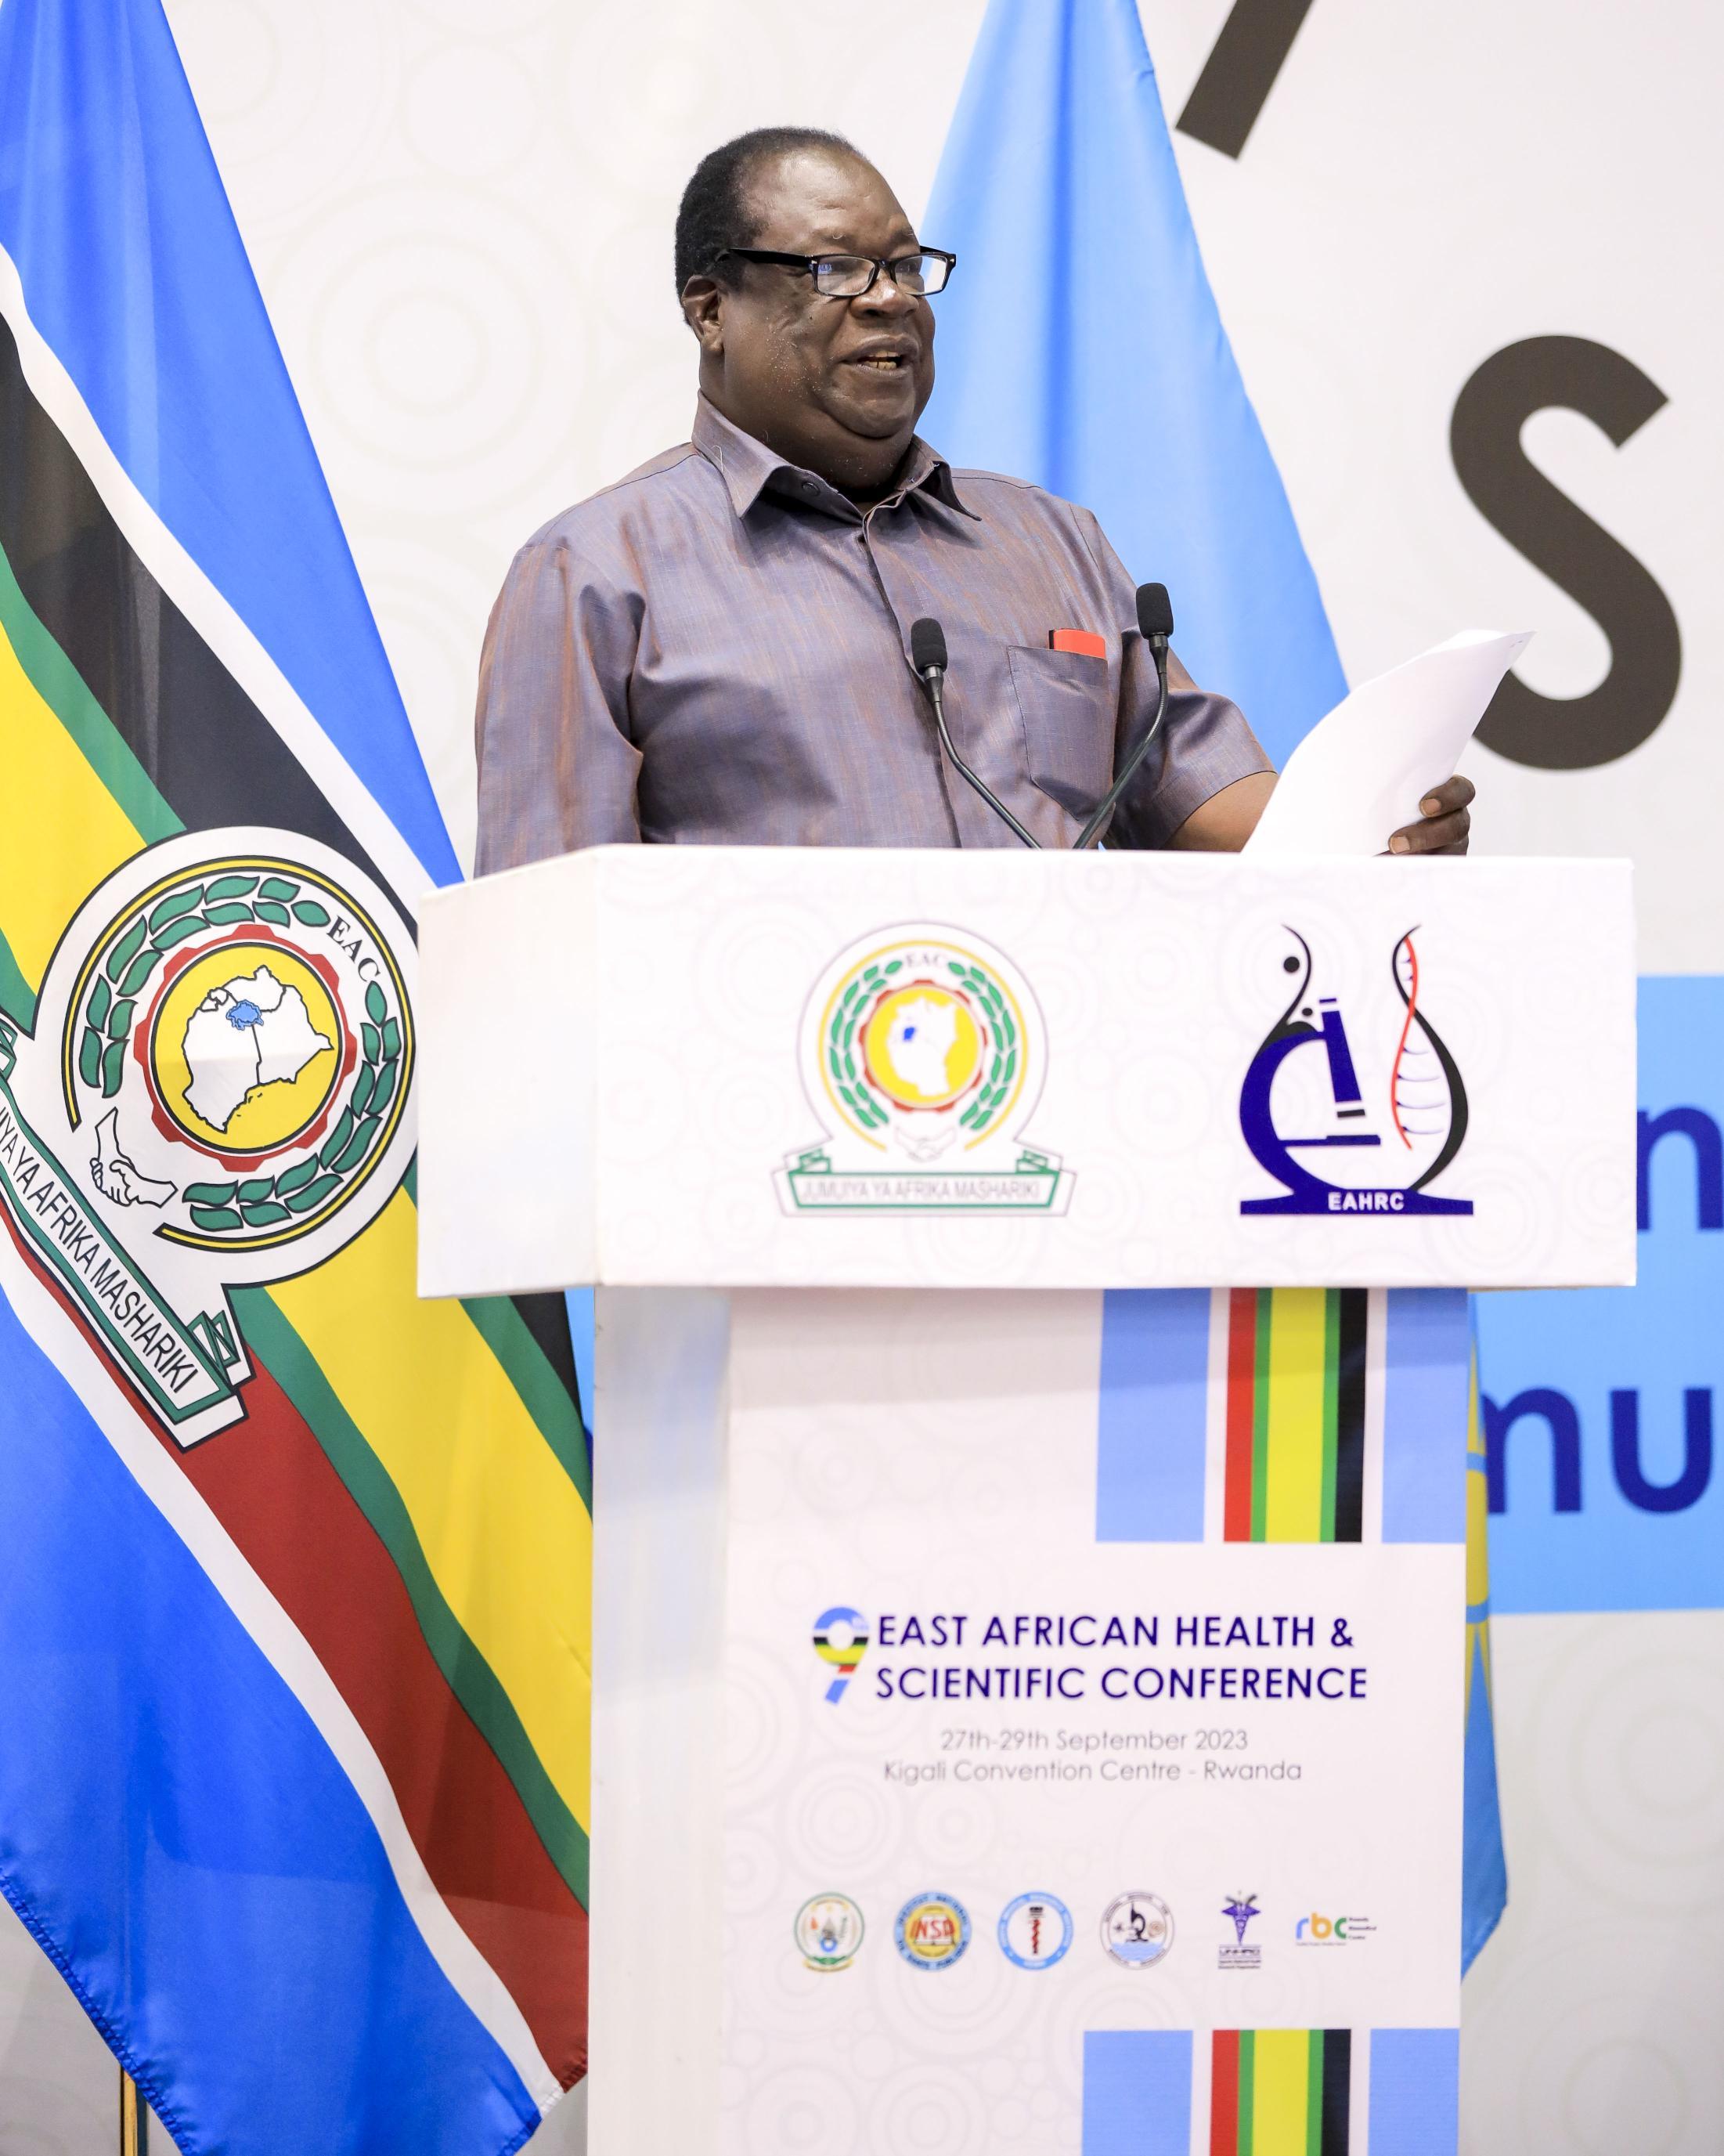 Uganda’s Minister of State for EAC Affairs, Hon. James Magode Ikuya, making his remarks during the official opening session of the 9th East African Health and Scientific Conference at the Kigali Convention Centre in Kigali.